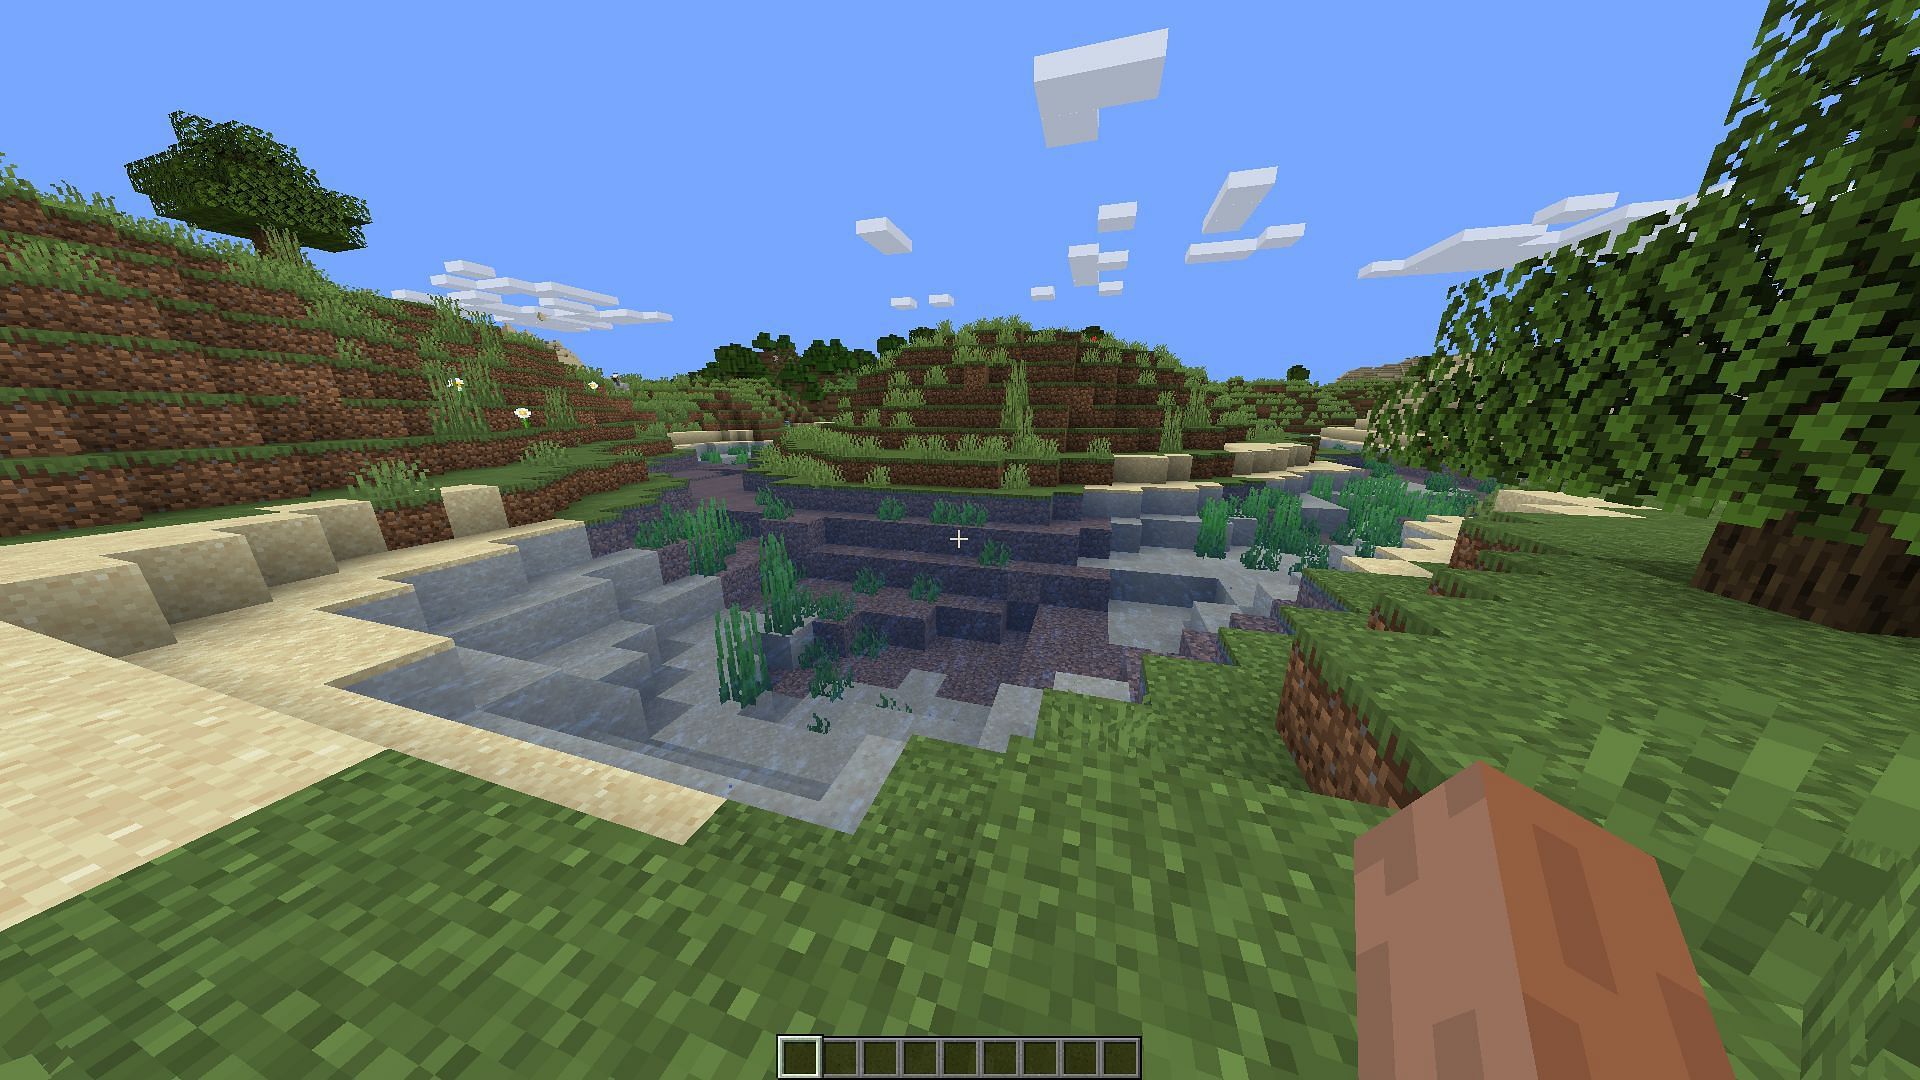 The Water Improved texture pack solely focuses on making water look more realistic in the game (Image via CurseForge)